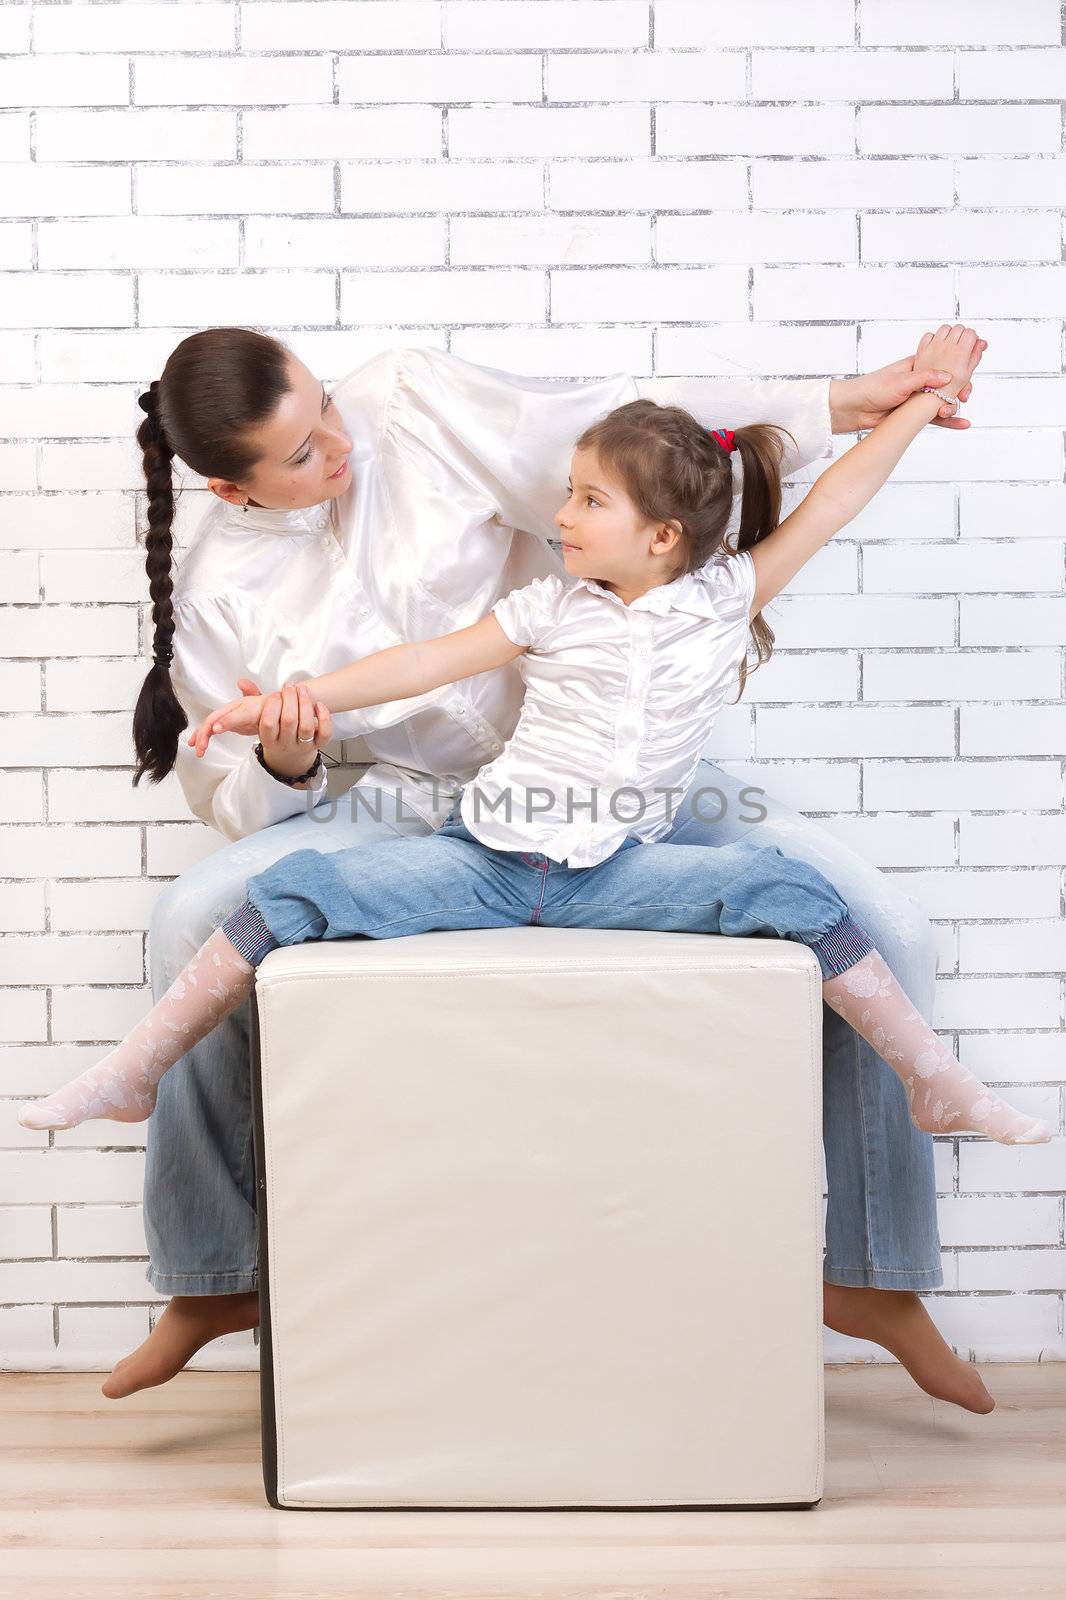 Mom and daughter in jeans and white shirts raised their hands